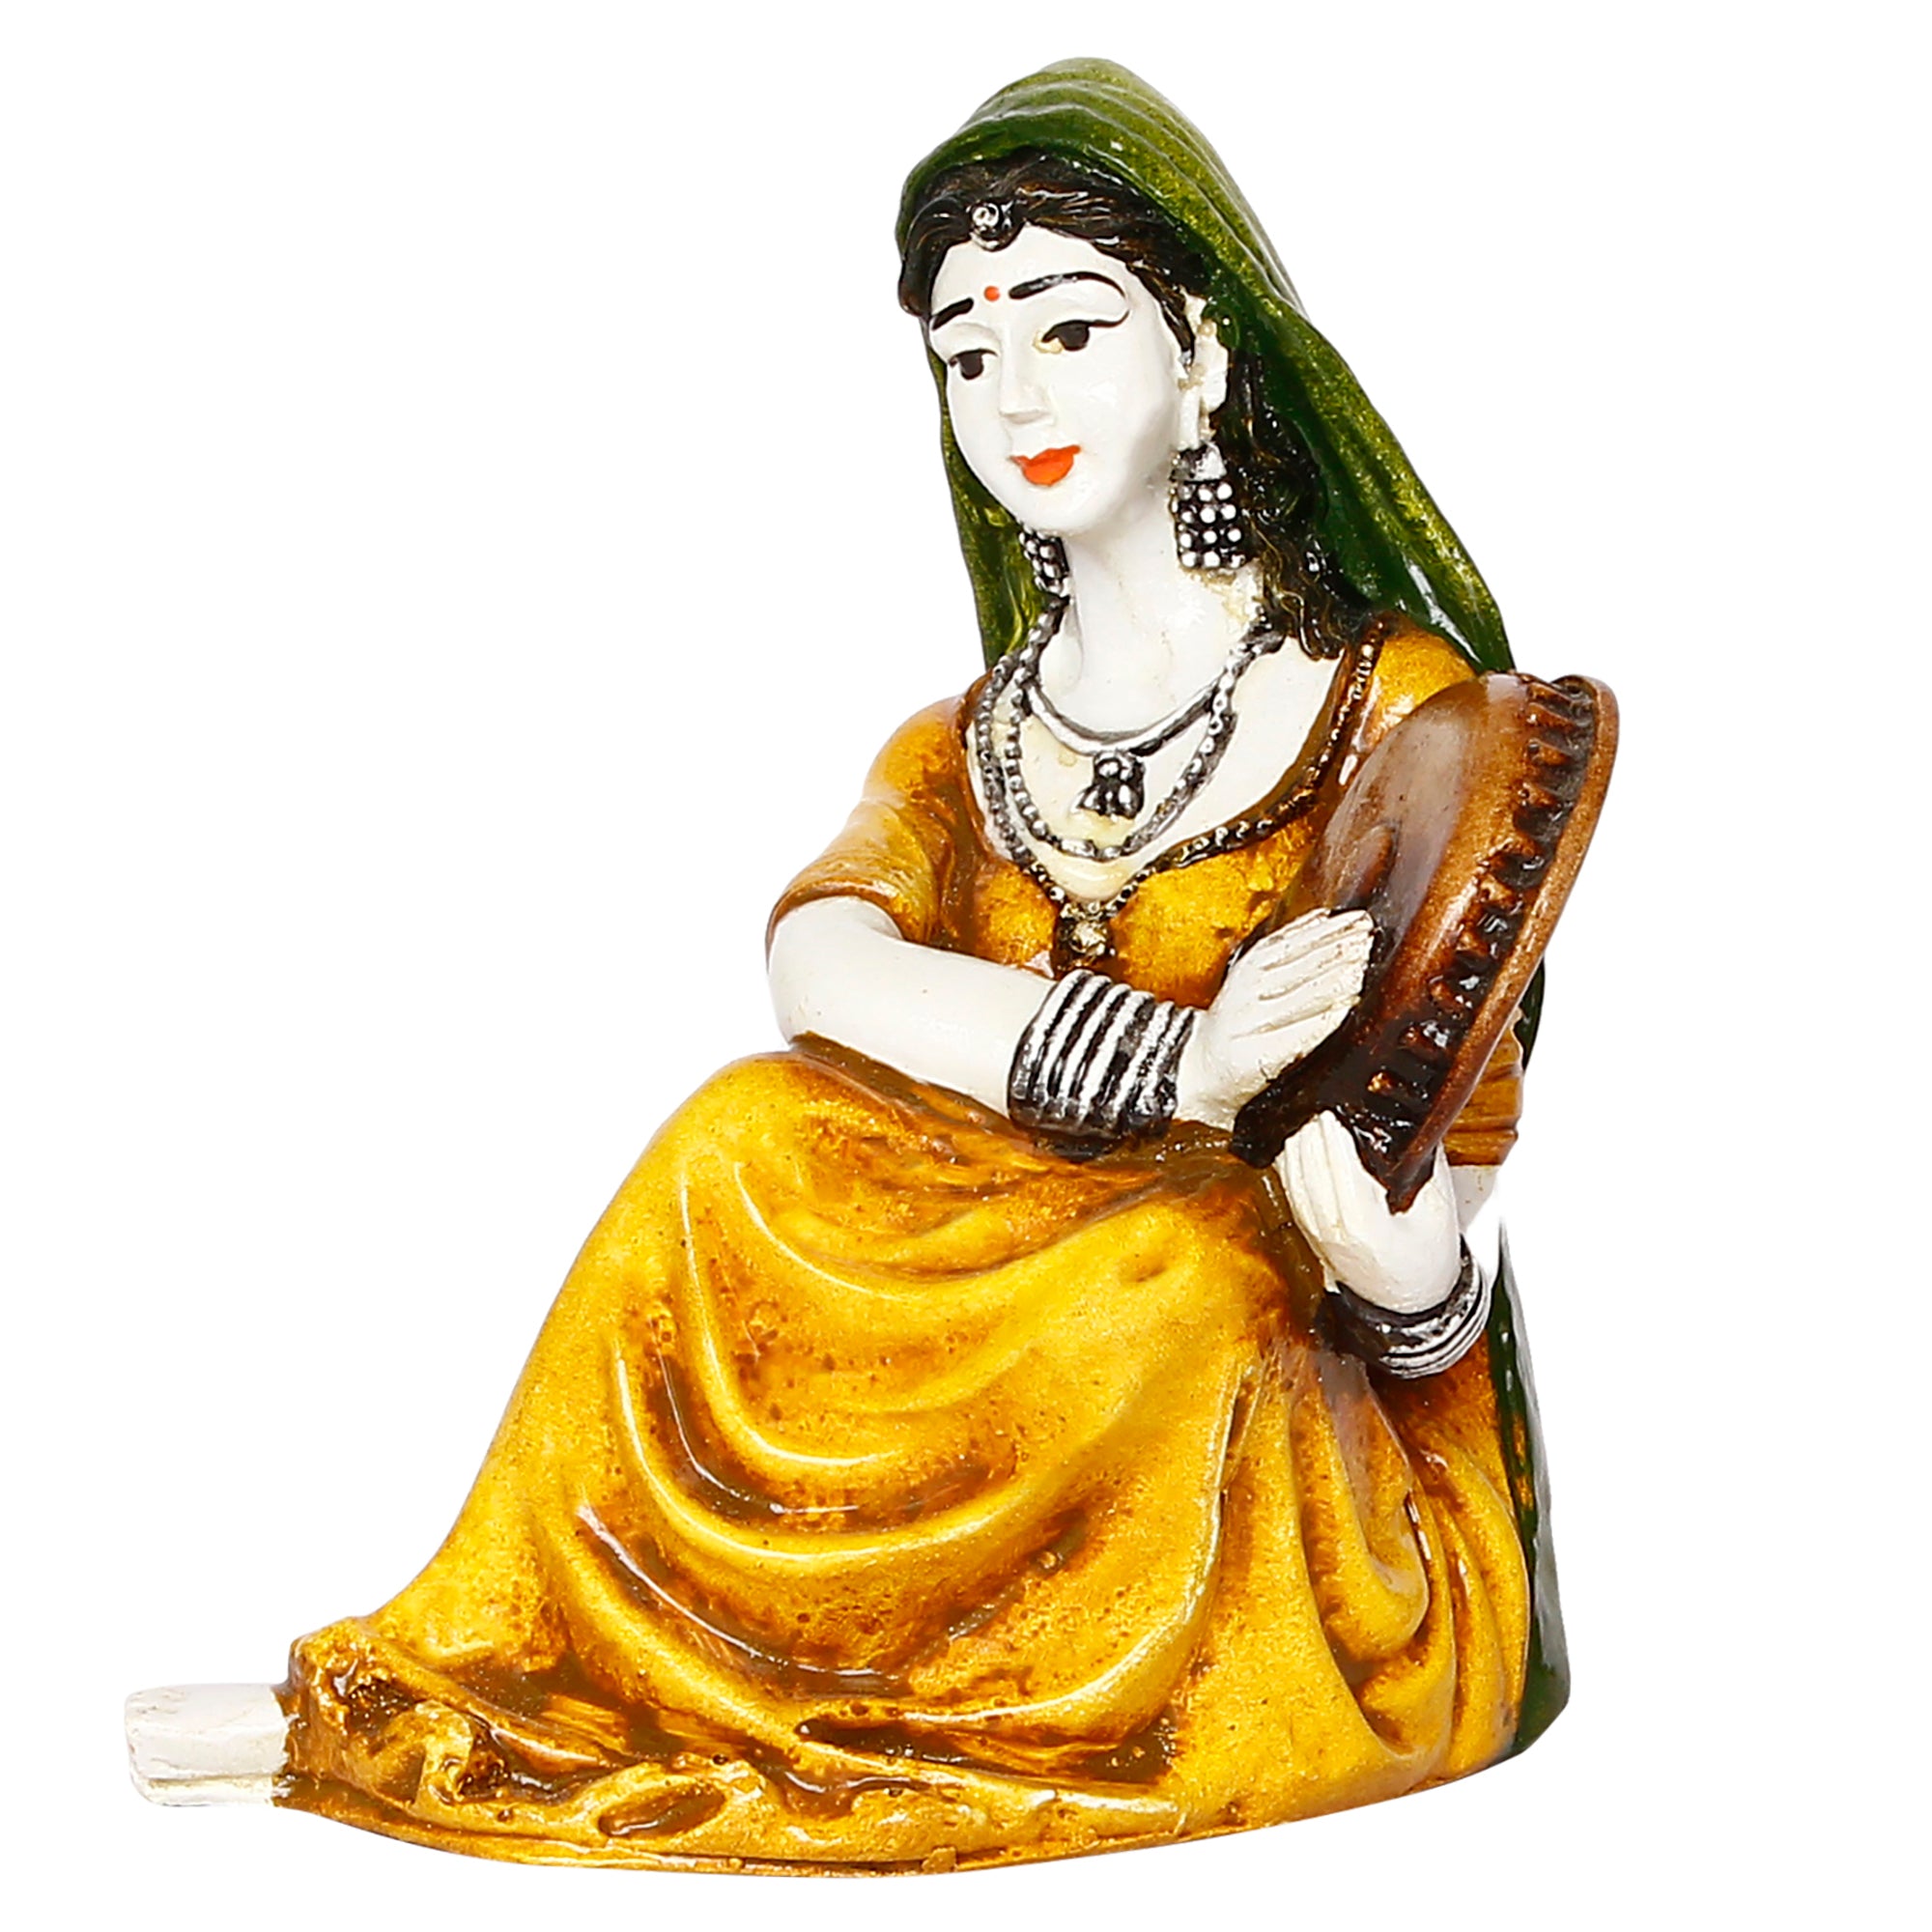 Polyresin Rajasthani Women Statue Playing Musical Instrument Handcrafted Human Figurine Decorative Showpiece 5